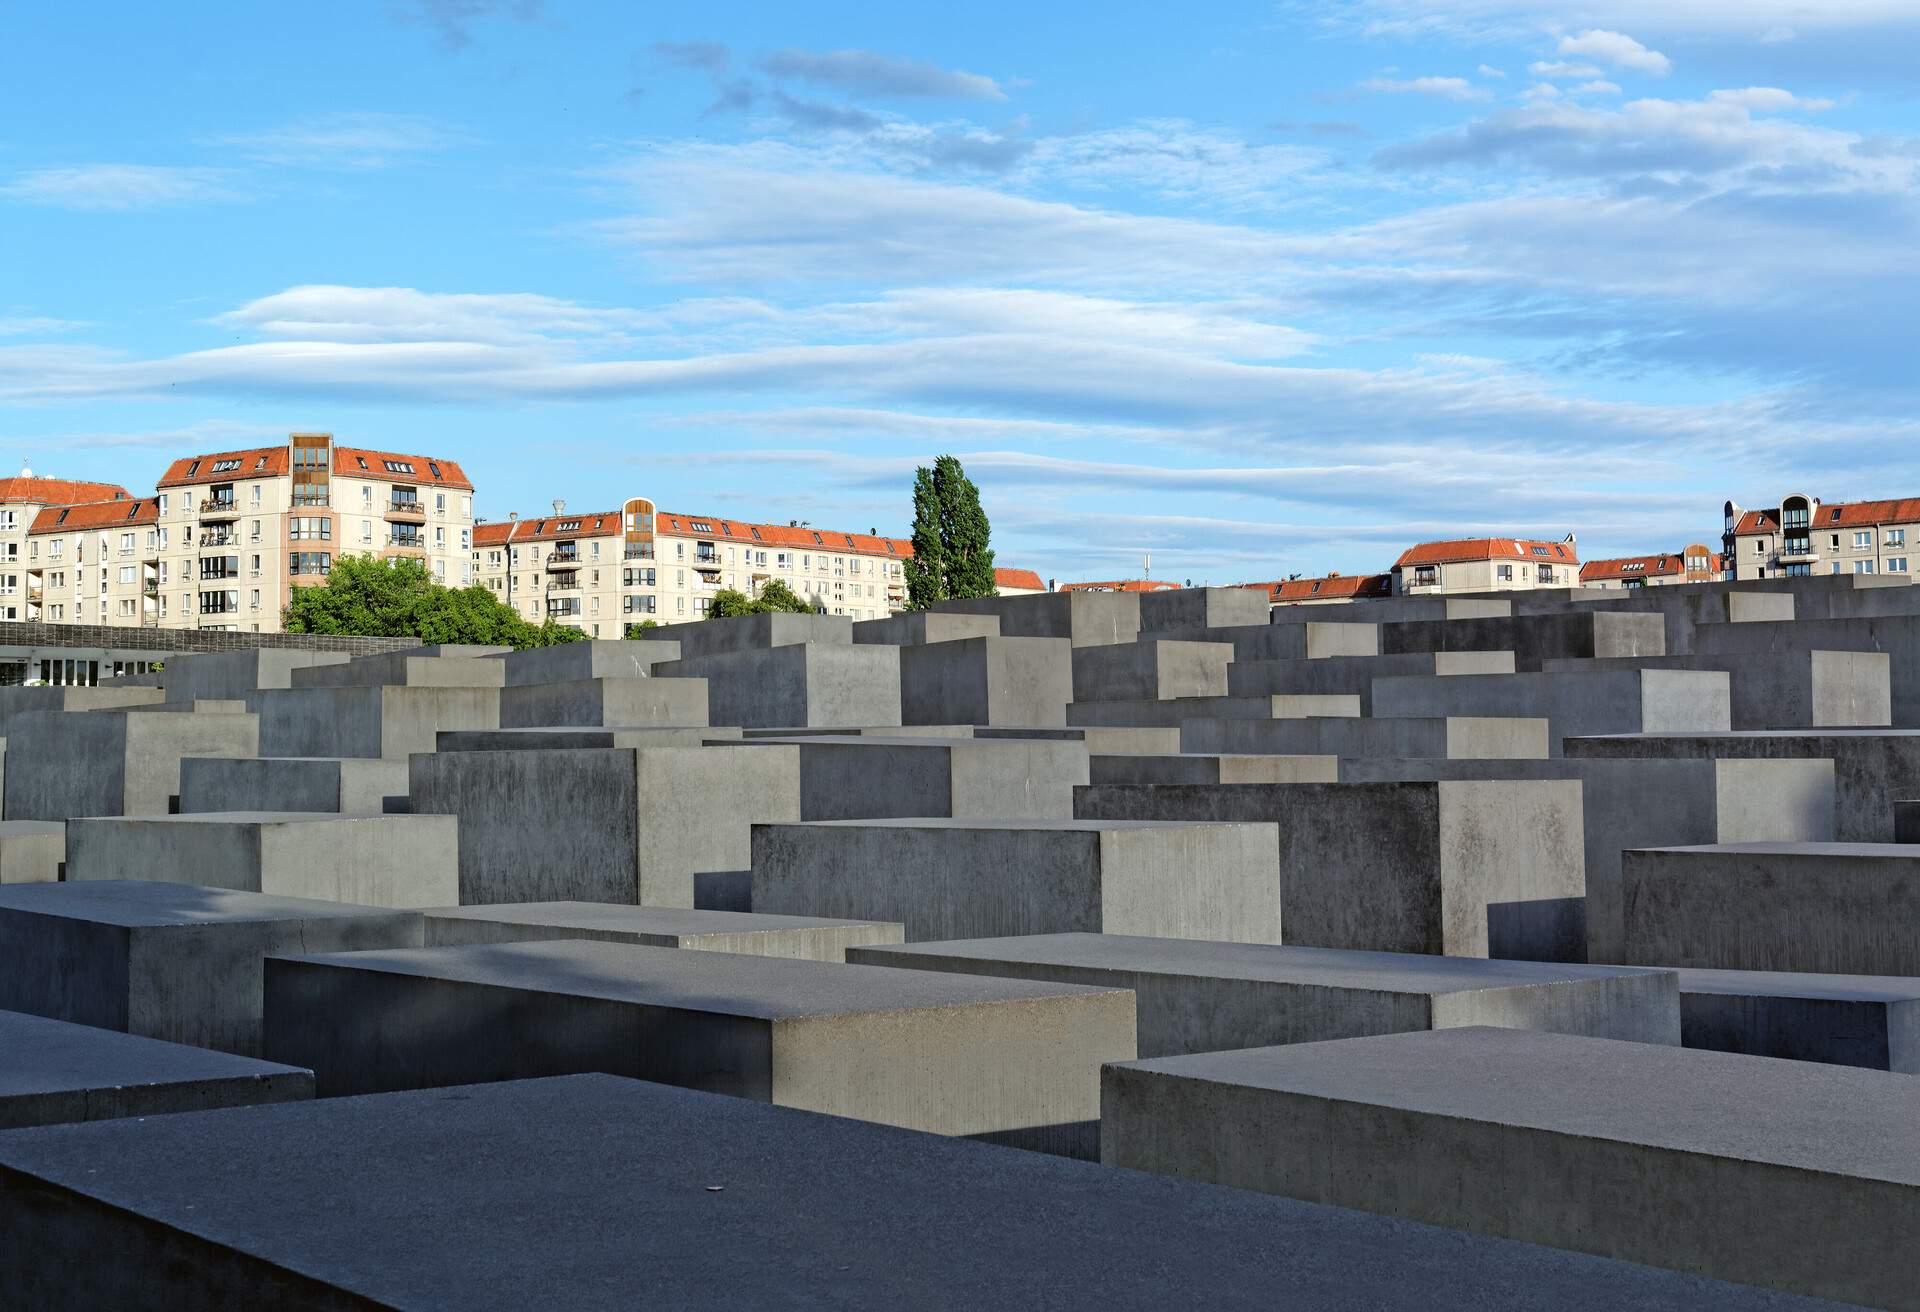 Holocaust Memorial (Monument to the Murdered Jews in Europe) in Berlin, Germany